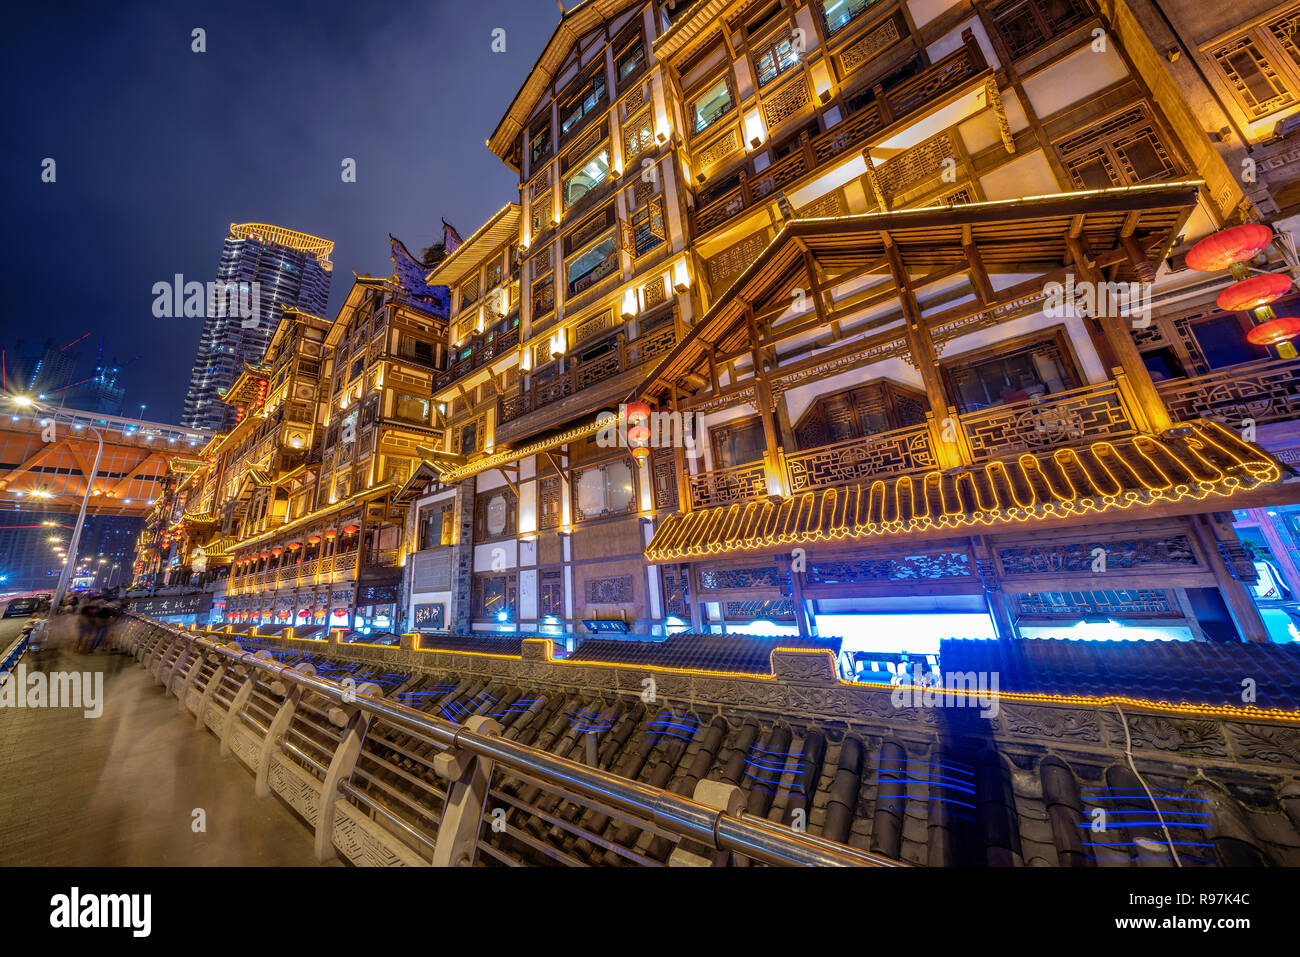 Traditional Chinese architecture of Hongyadong at night in Chongqing Stock Photo